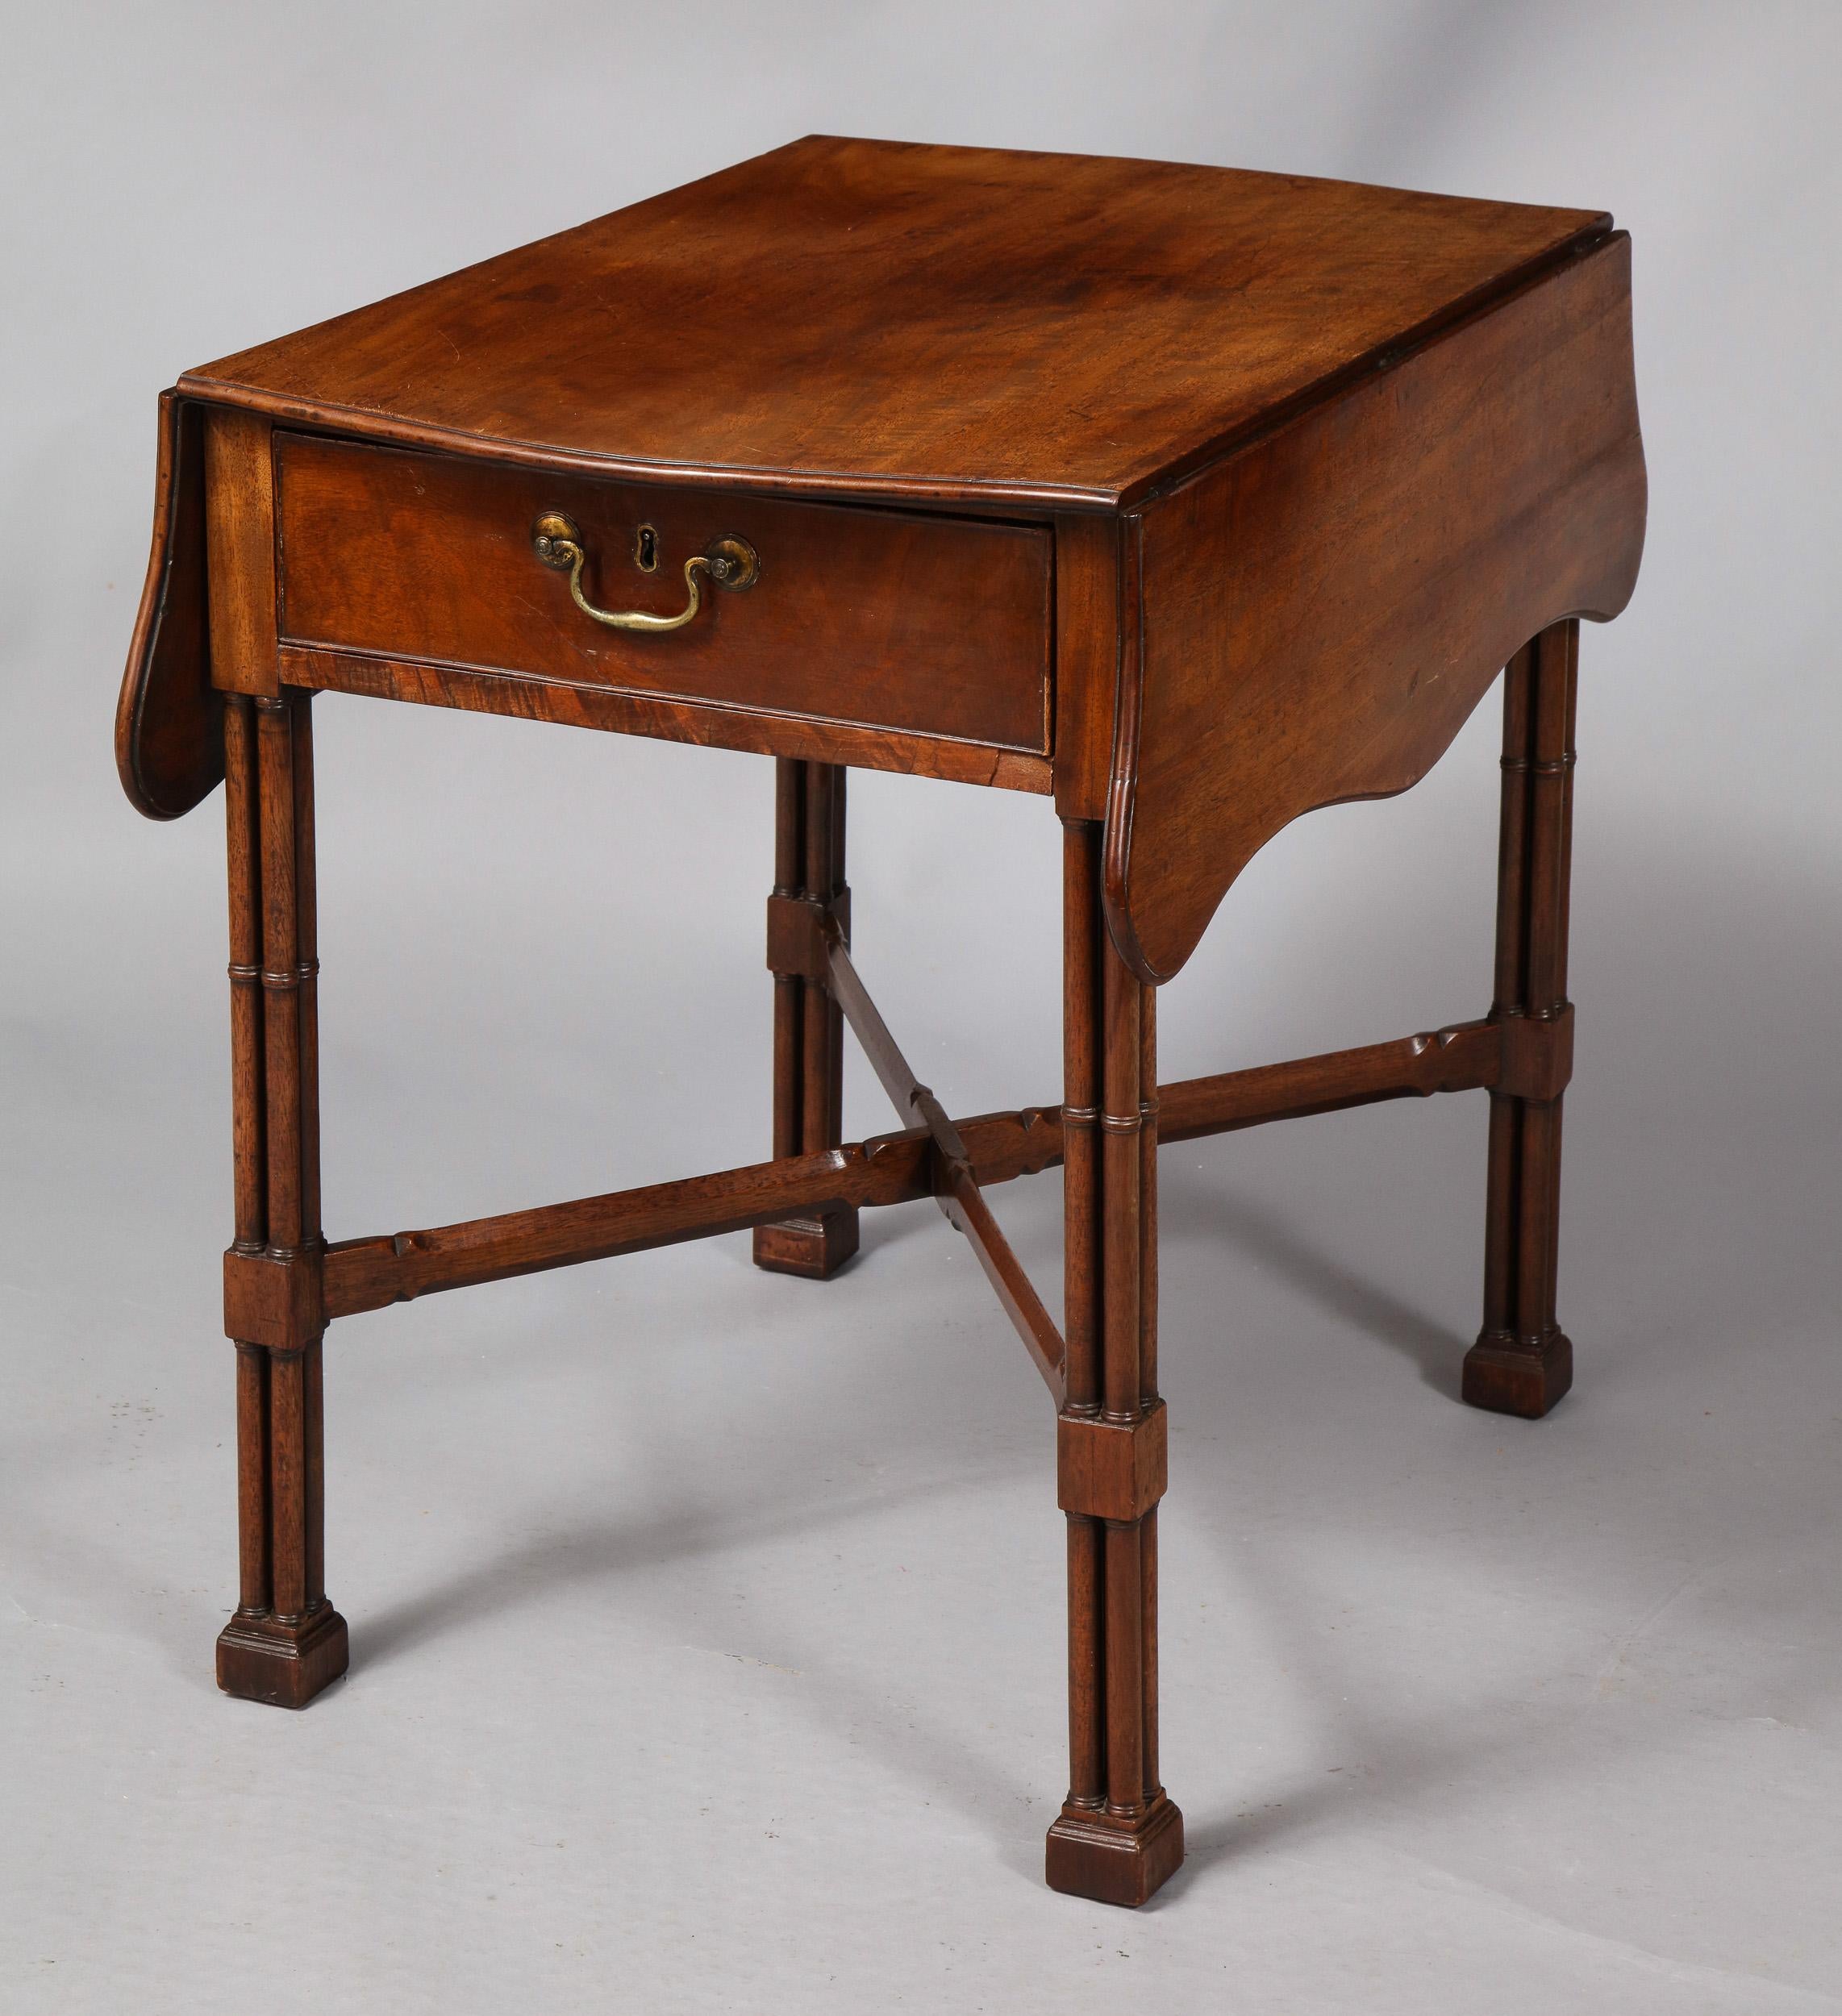 Georgian Pembroke Table in the Manner of Thomas Chippendale 10